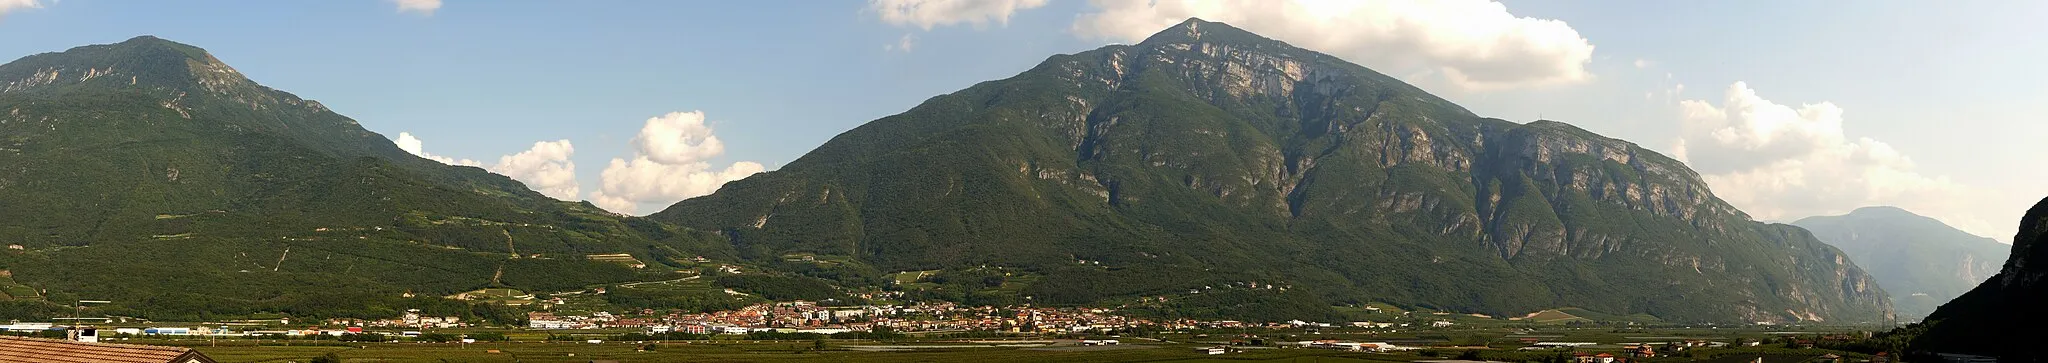 Photo showing: Mattarello (Trento, Italy): panorama of Mattarello from Romagnano, with the mount Marzola on the left, the mount Vigolana on the right. On the extreme right, in the distance, Castel Beseno (Beseno's castle).